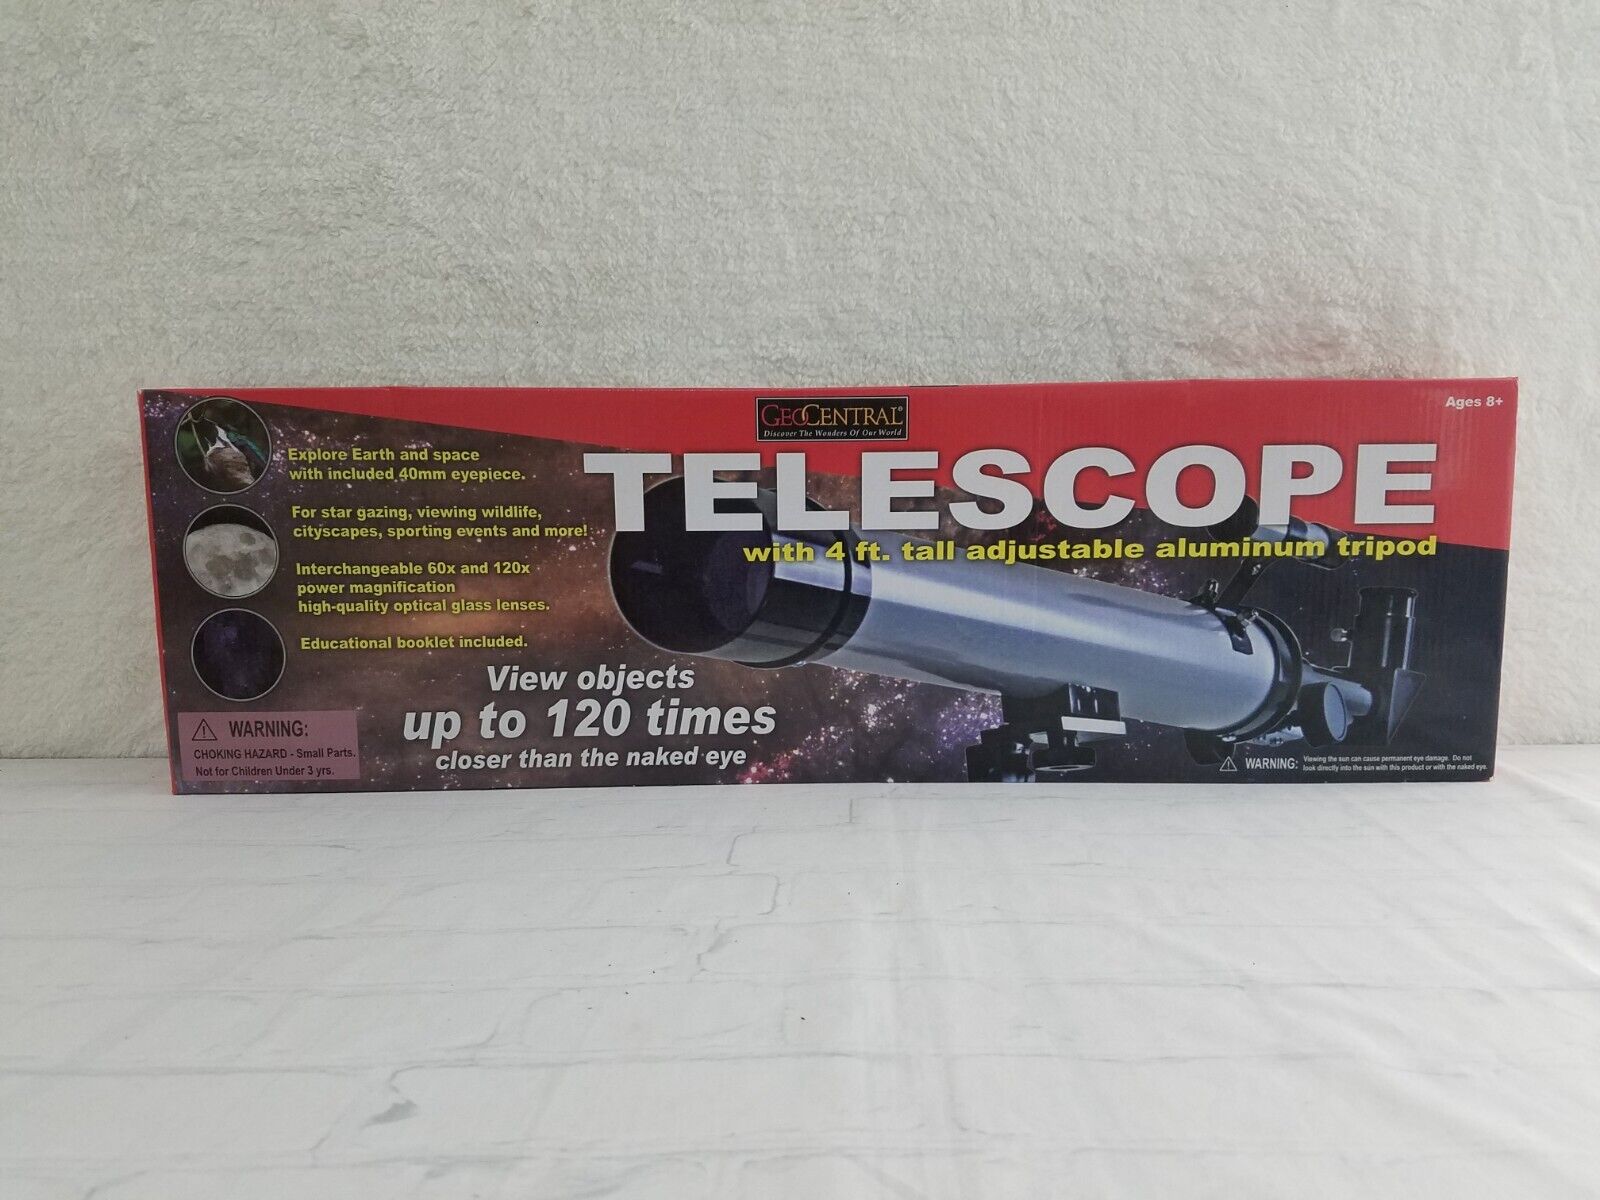 Telescope with 4' Adjustable Aluminum Tripod - View Objects up to 120 Times